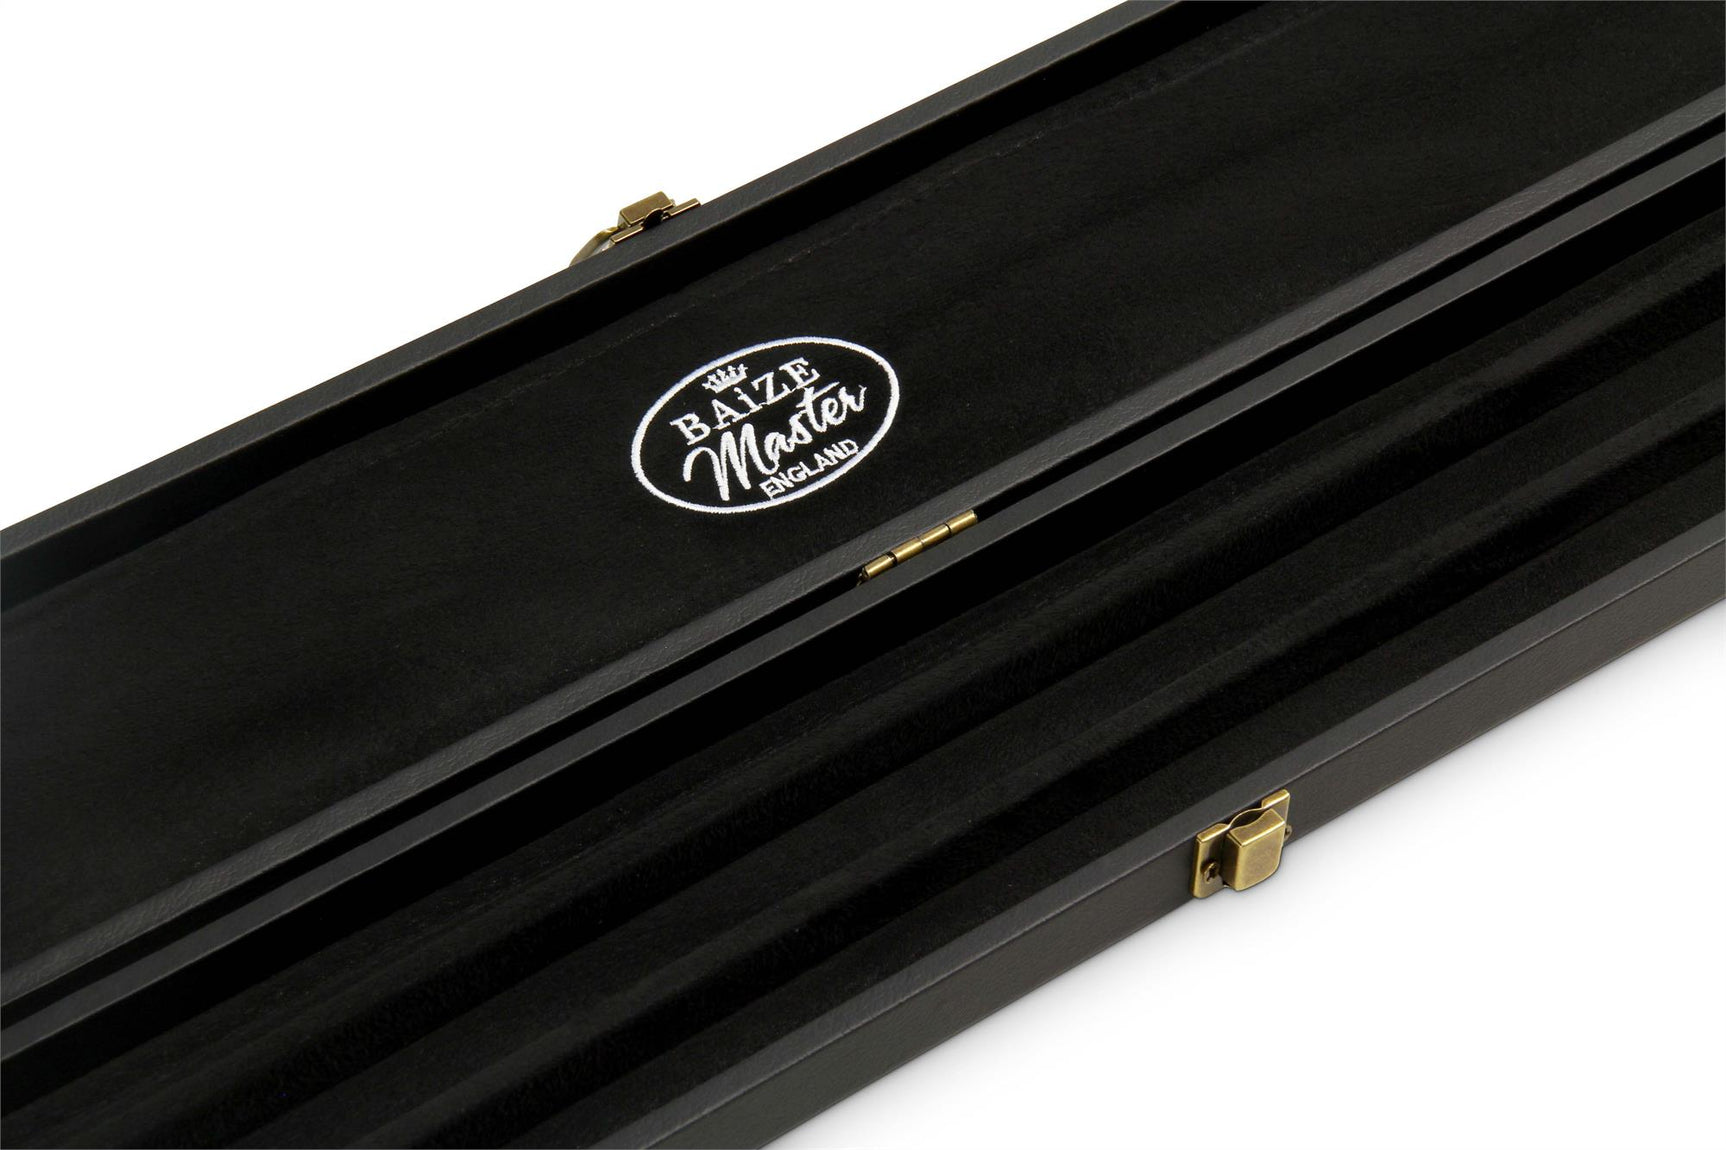 Baize Master 1pc WIDE PLAIN BLACK Pool Snooker Cue Case with Plastic Ends - Holds 3 Cues